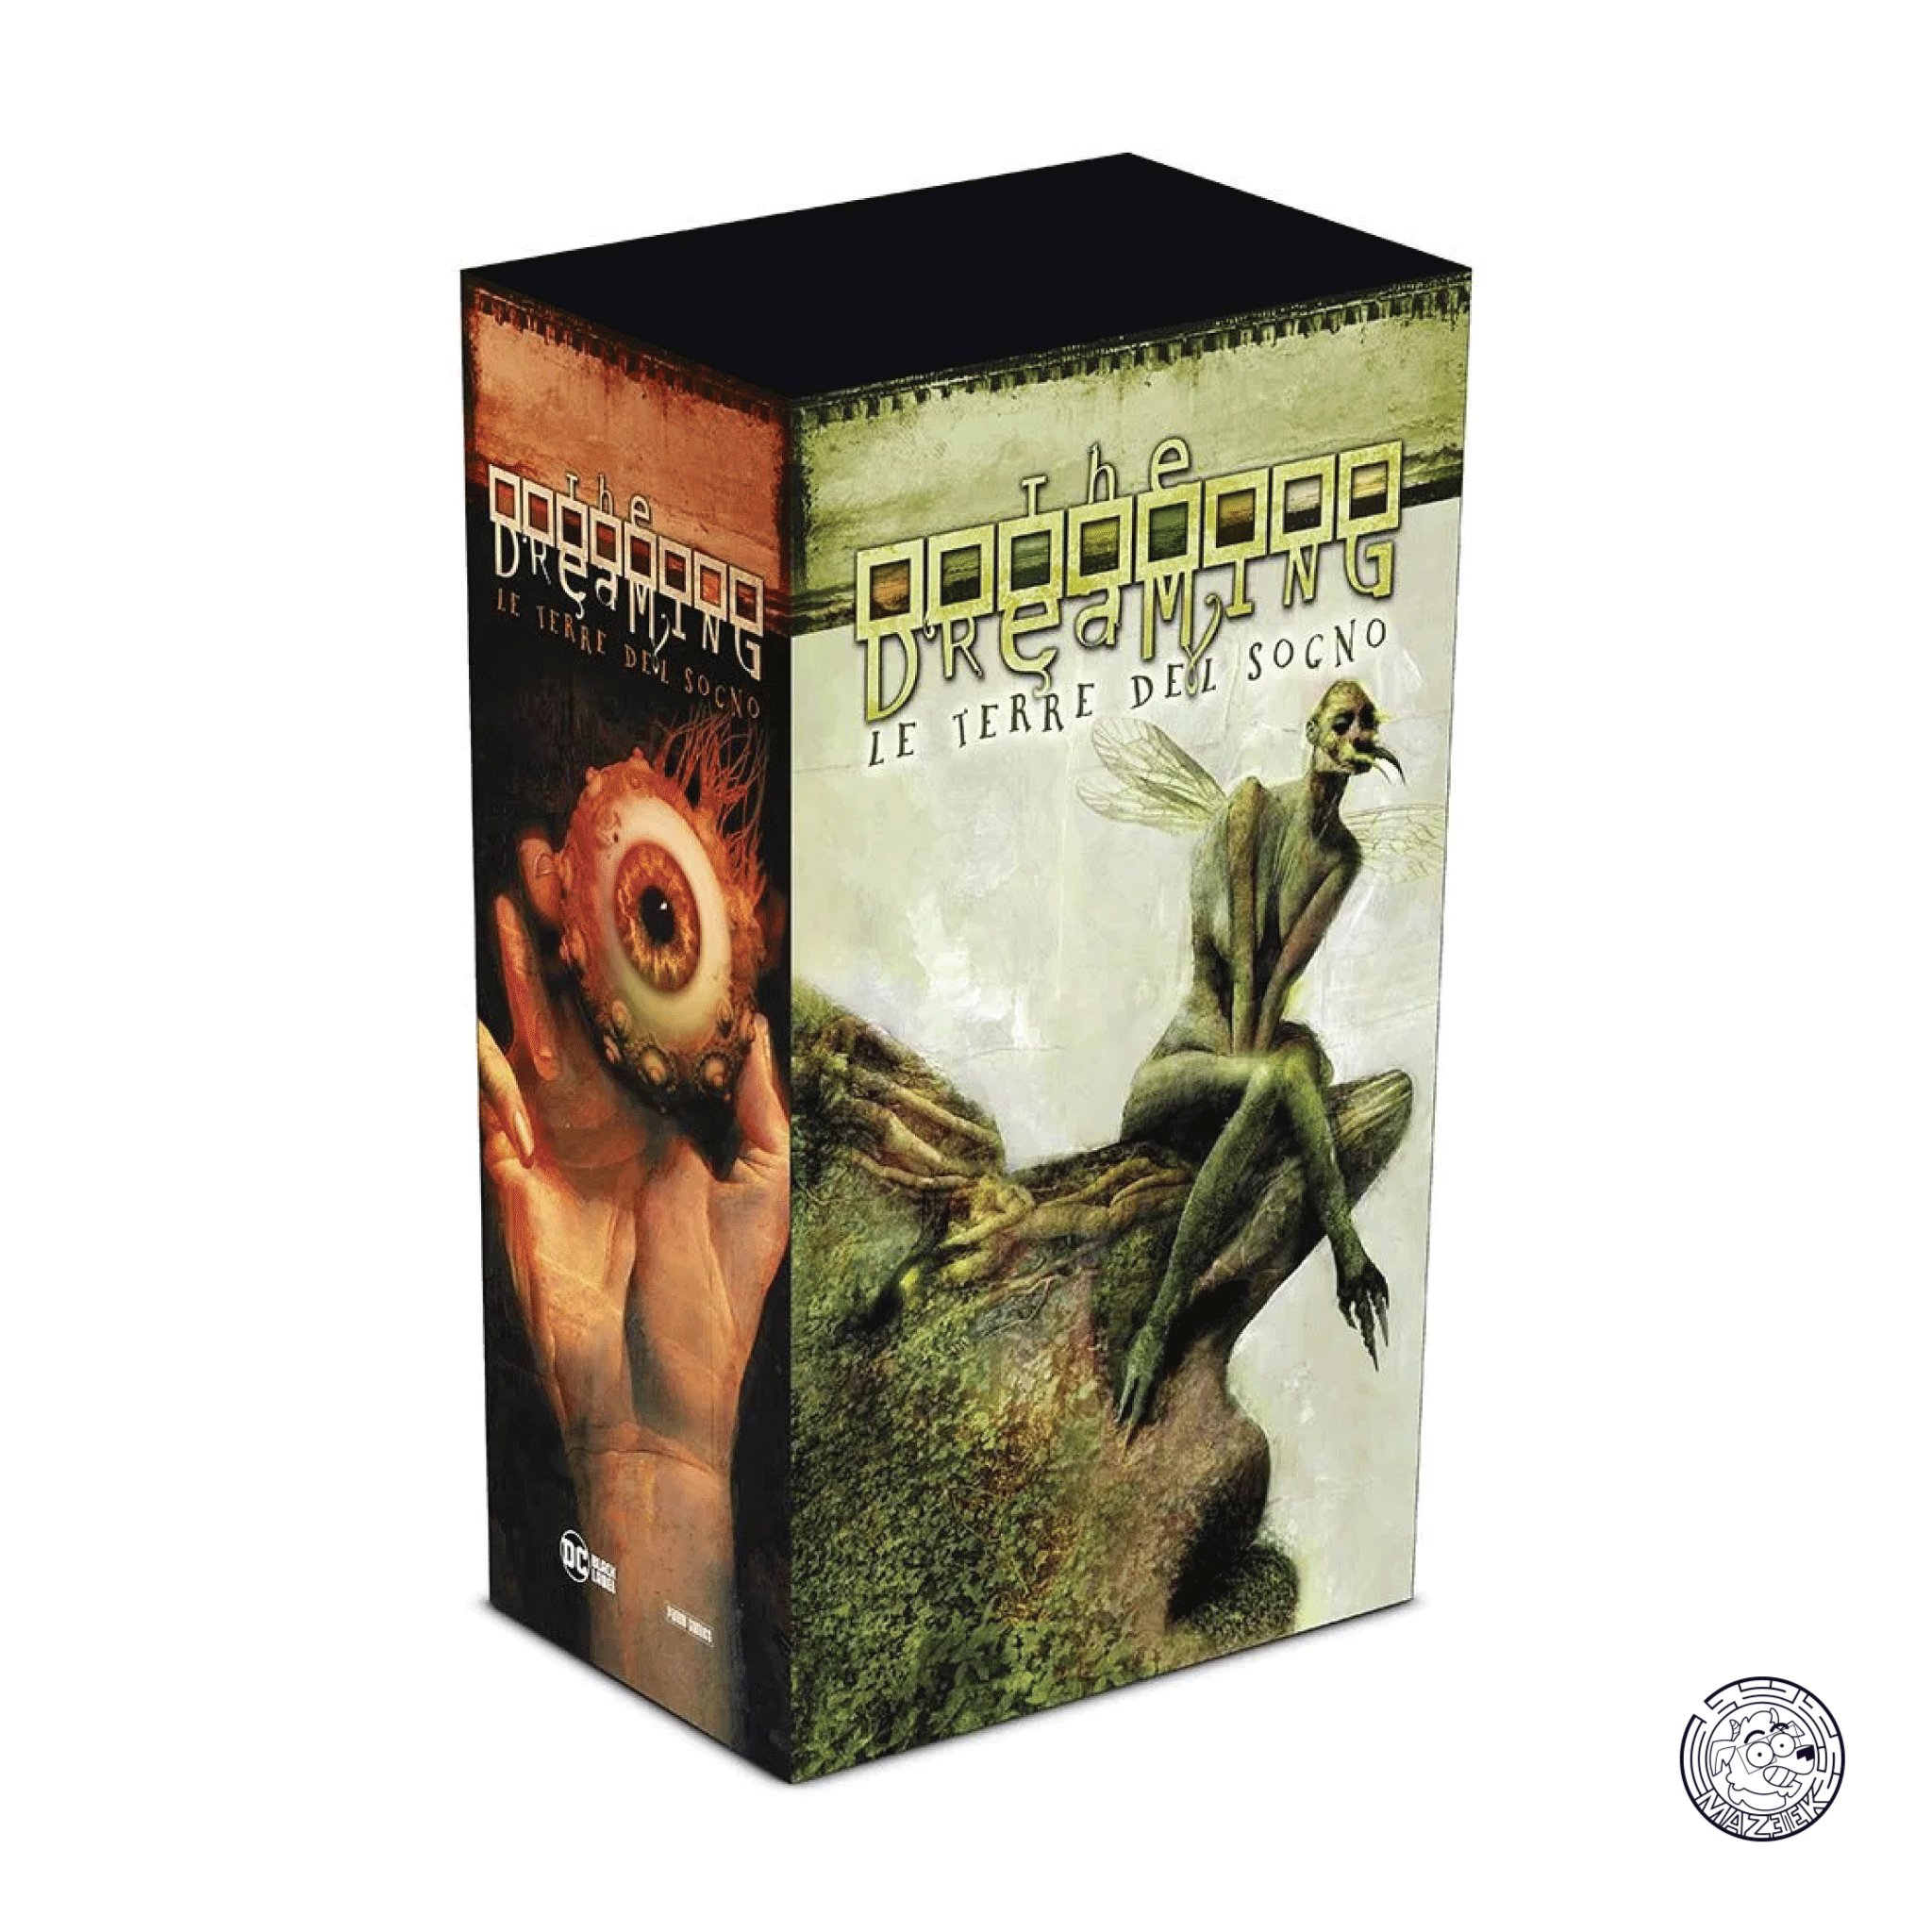 The Dreaming - The Lands of Dreams - Complete Box Set